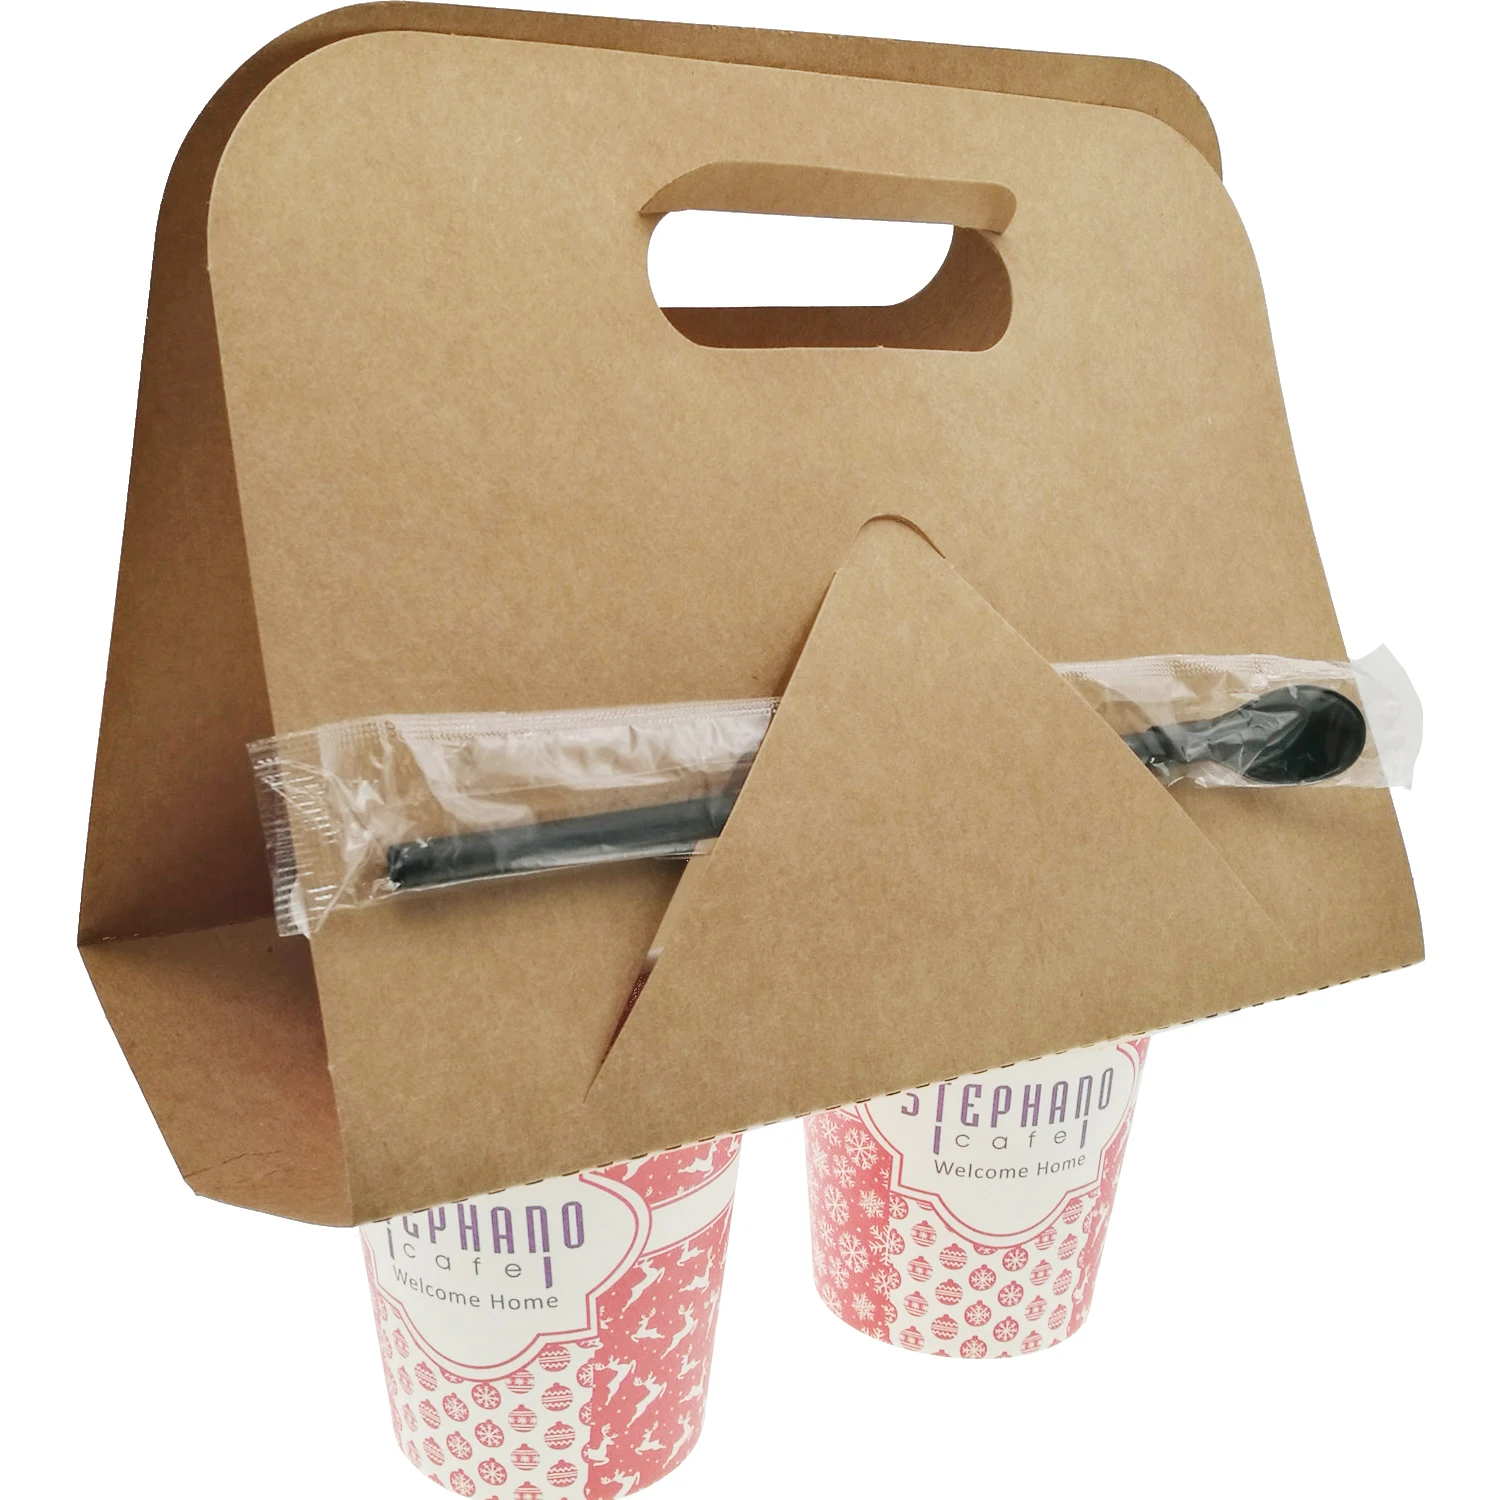 Flat Packing Cup Holder Paper Bag Coffee To Go Cup - Buy Cup Holder Paper  Bag,Coffee To Go Cup,Flat Packing Cup Holder…